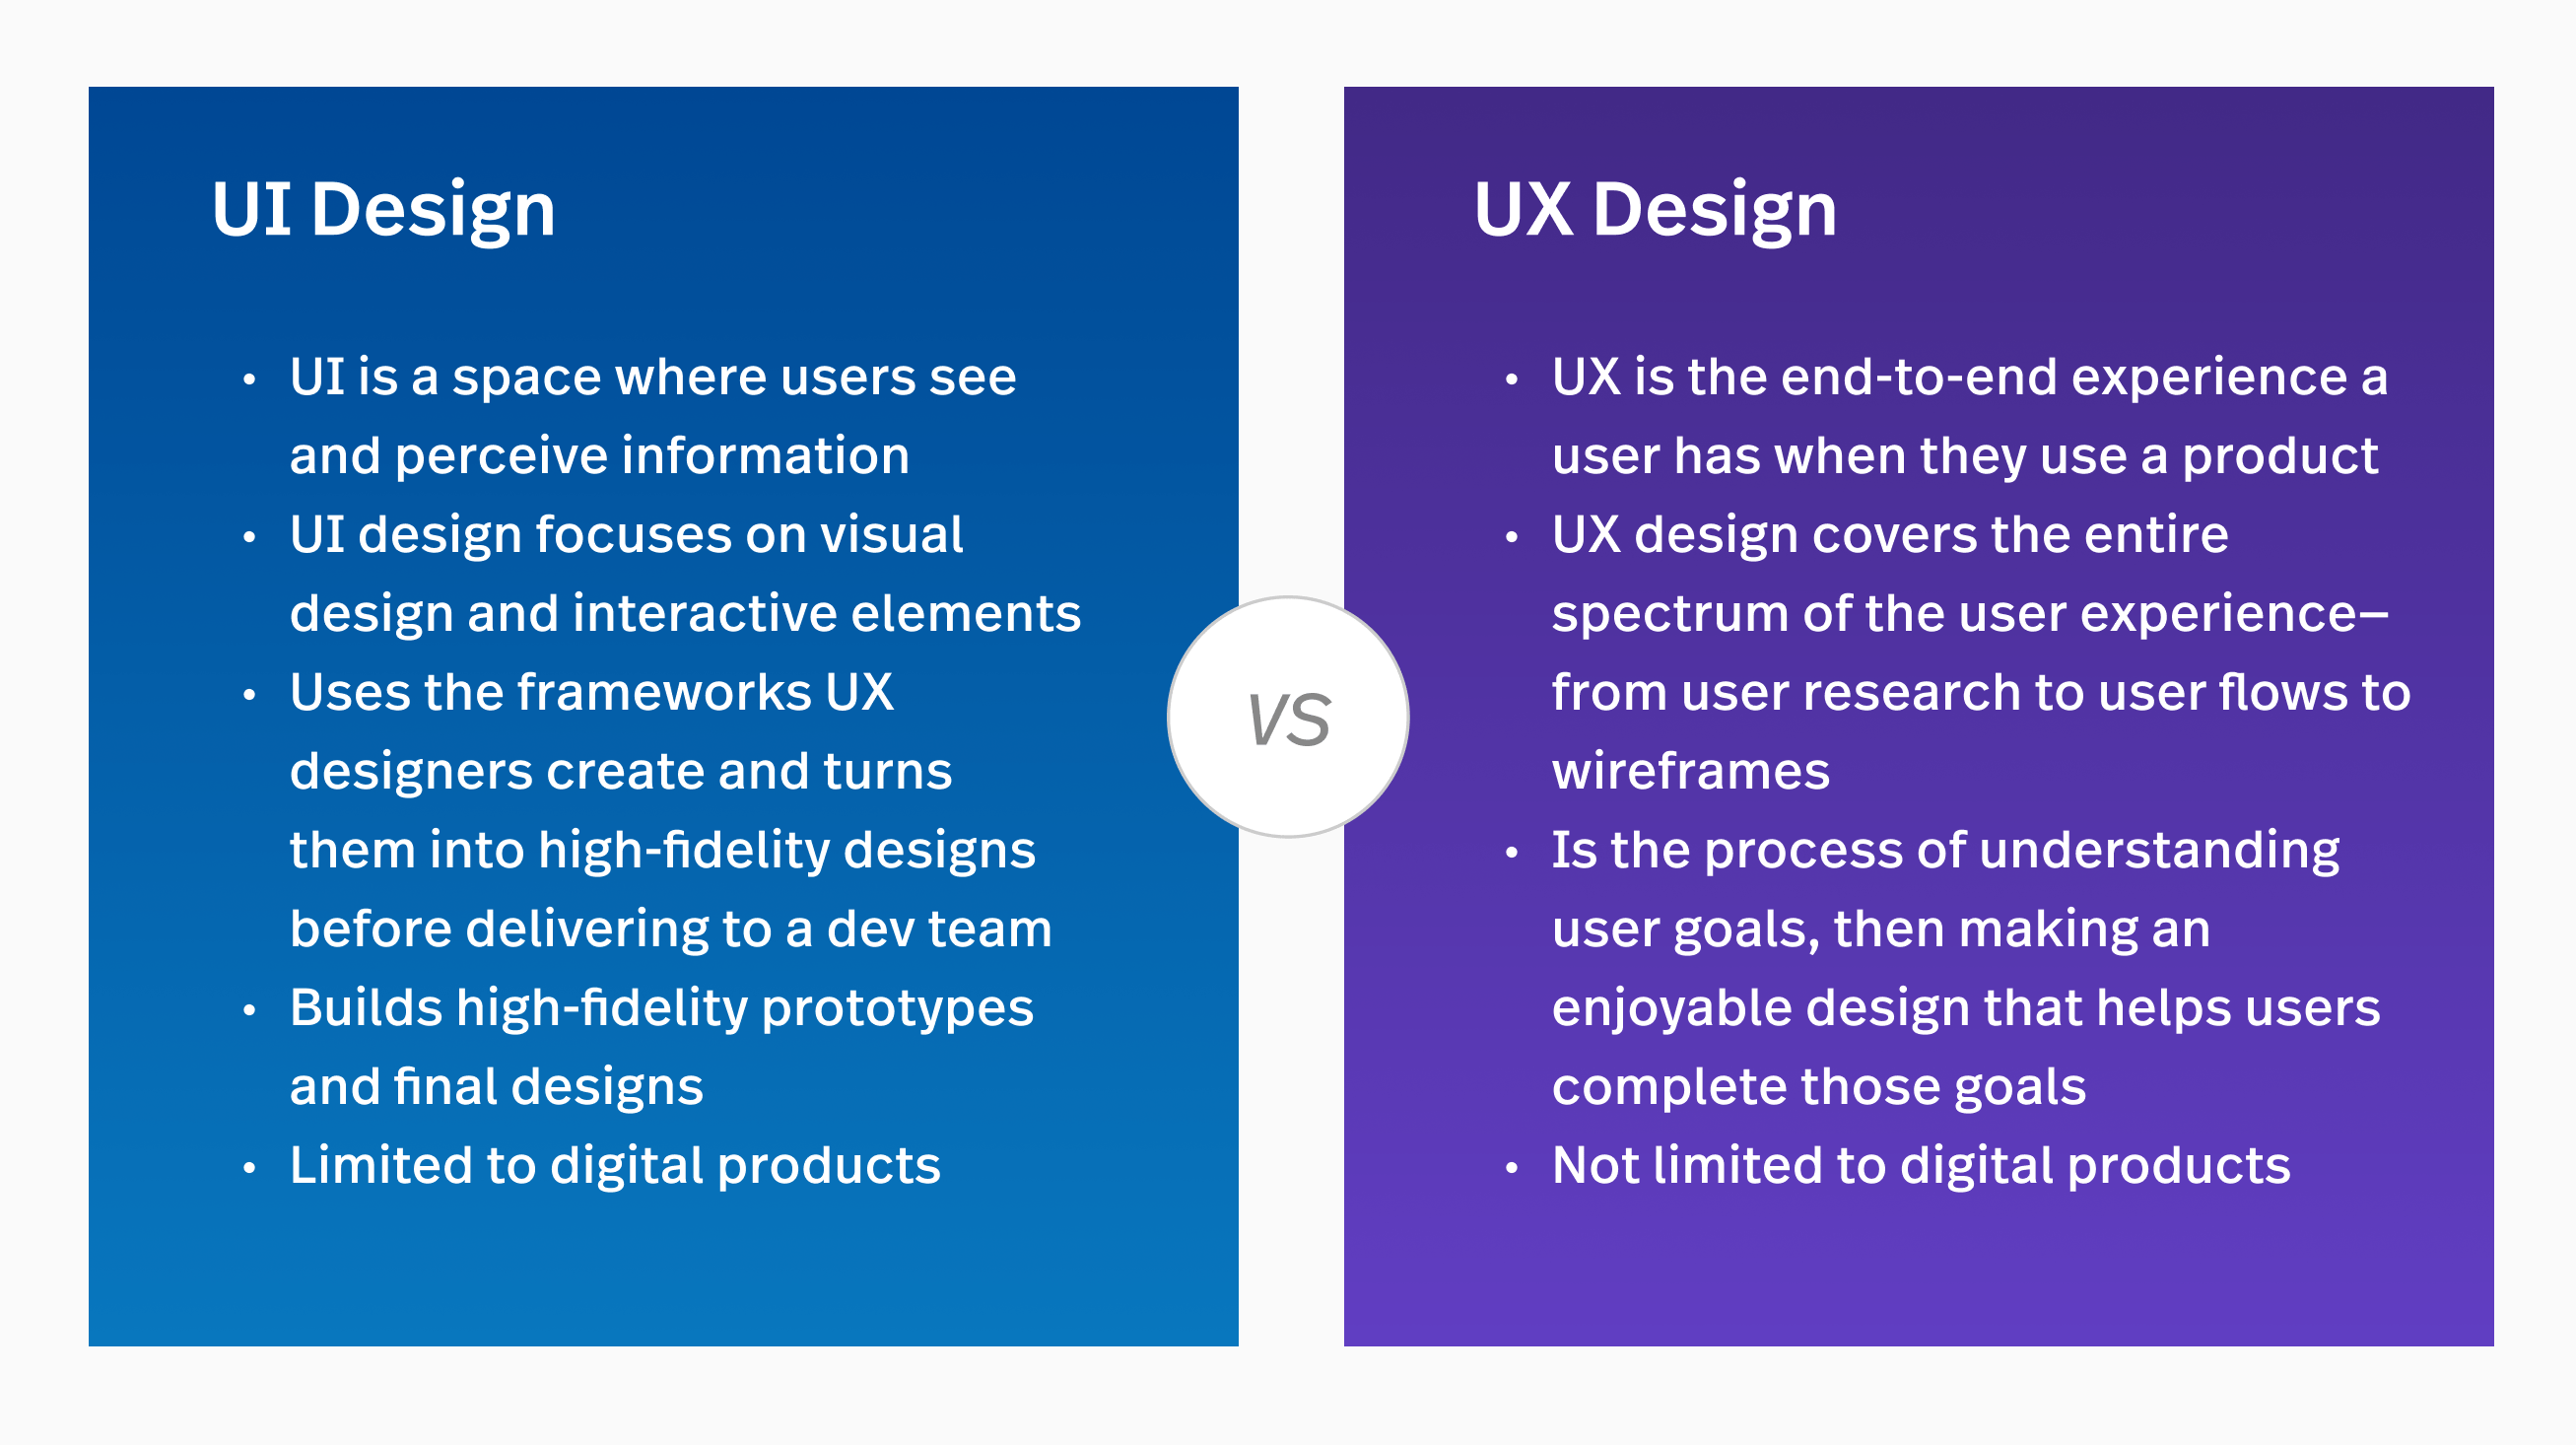 UI design vs. UX design. UI design: UI is a space where users see and perceive information, UI design focuses on visual design and interactive elements, Uses the frameworks UX designers create and turns them into high-fidelity designs before delivering to a dev team, Builds high-fidelity prototypes and final designs, Limited to digital products. UX design: UX is the end-to-end experience a user has when they use a product. UX design covers the entire spectrum of the user experience—from user research to user flows to wireframes. Is the process of understanding user goals, then making an enjoyable design that helps users complete those goals. Not limited to digital products.